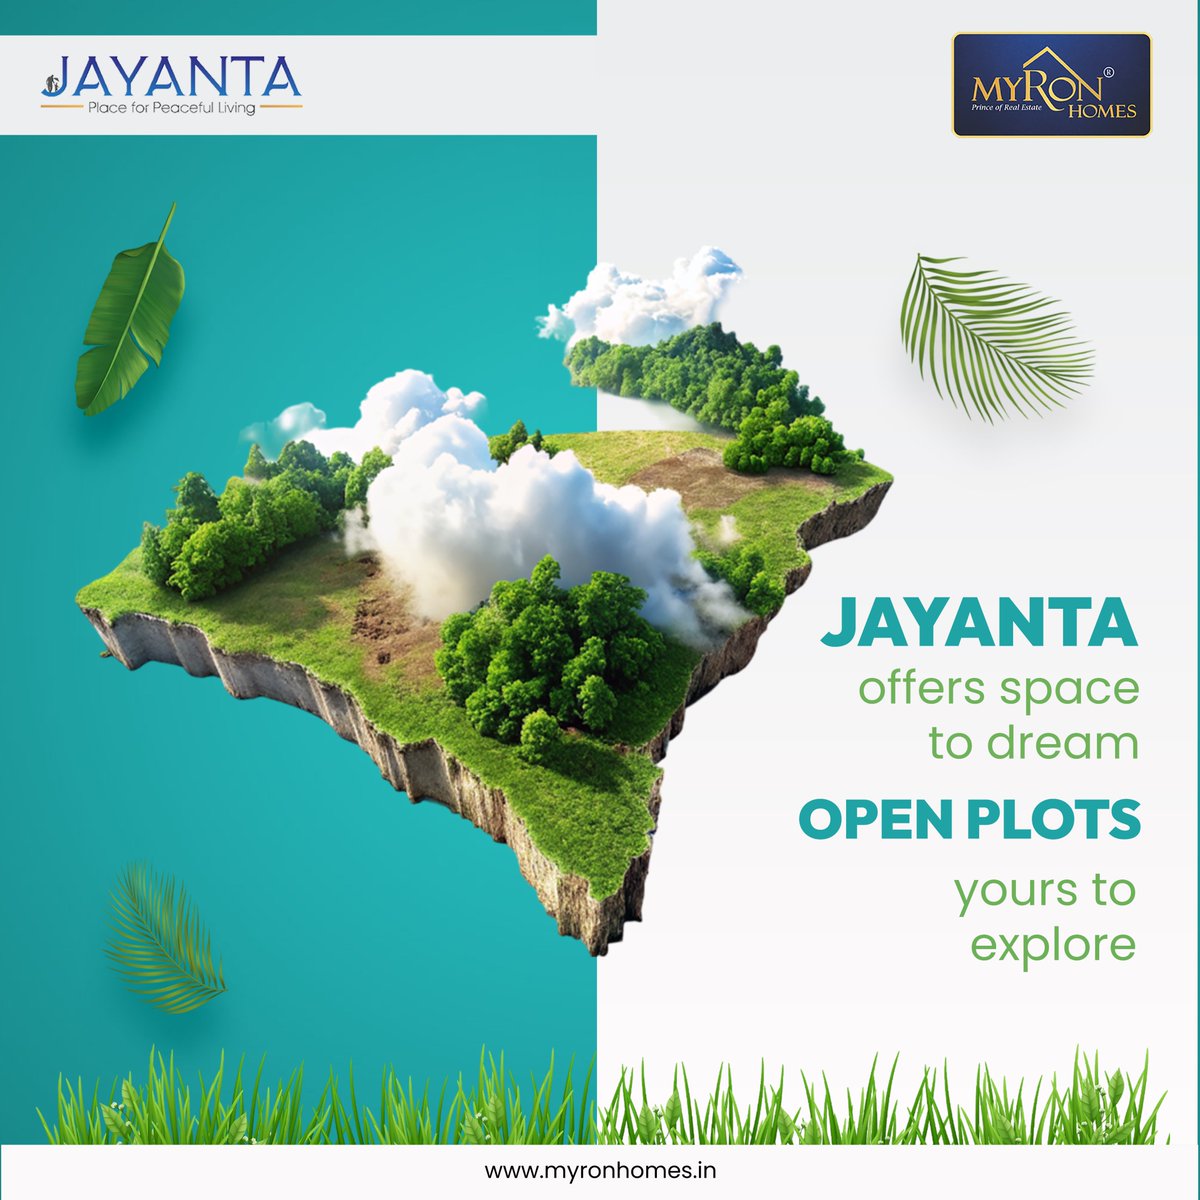 Step into a world of opportunity with Jayanta's open plots. Each plot offers space for you to dream, explore, and create the home you've always wanted.

#jayanta #Myronhomes #myronhomesinfra #jayantaopenplots #PoweringTheFuture #HighReturns #plotsforsale #Tirupati #realestatelife